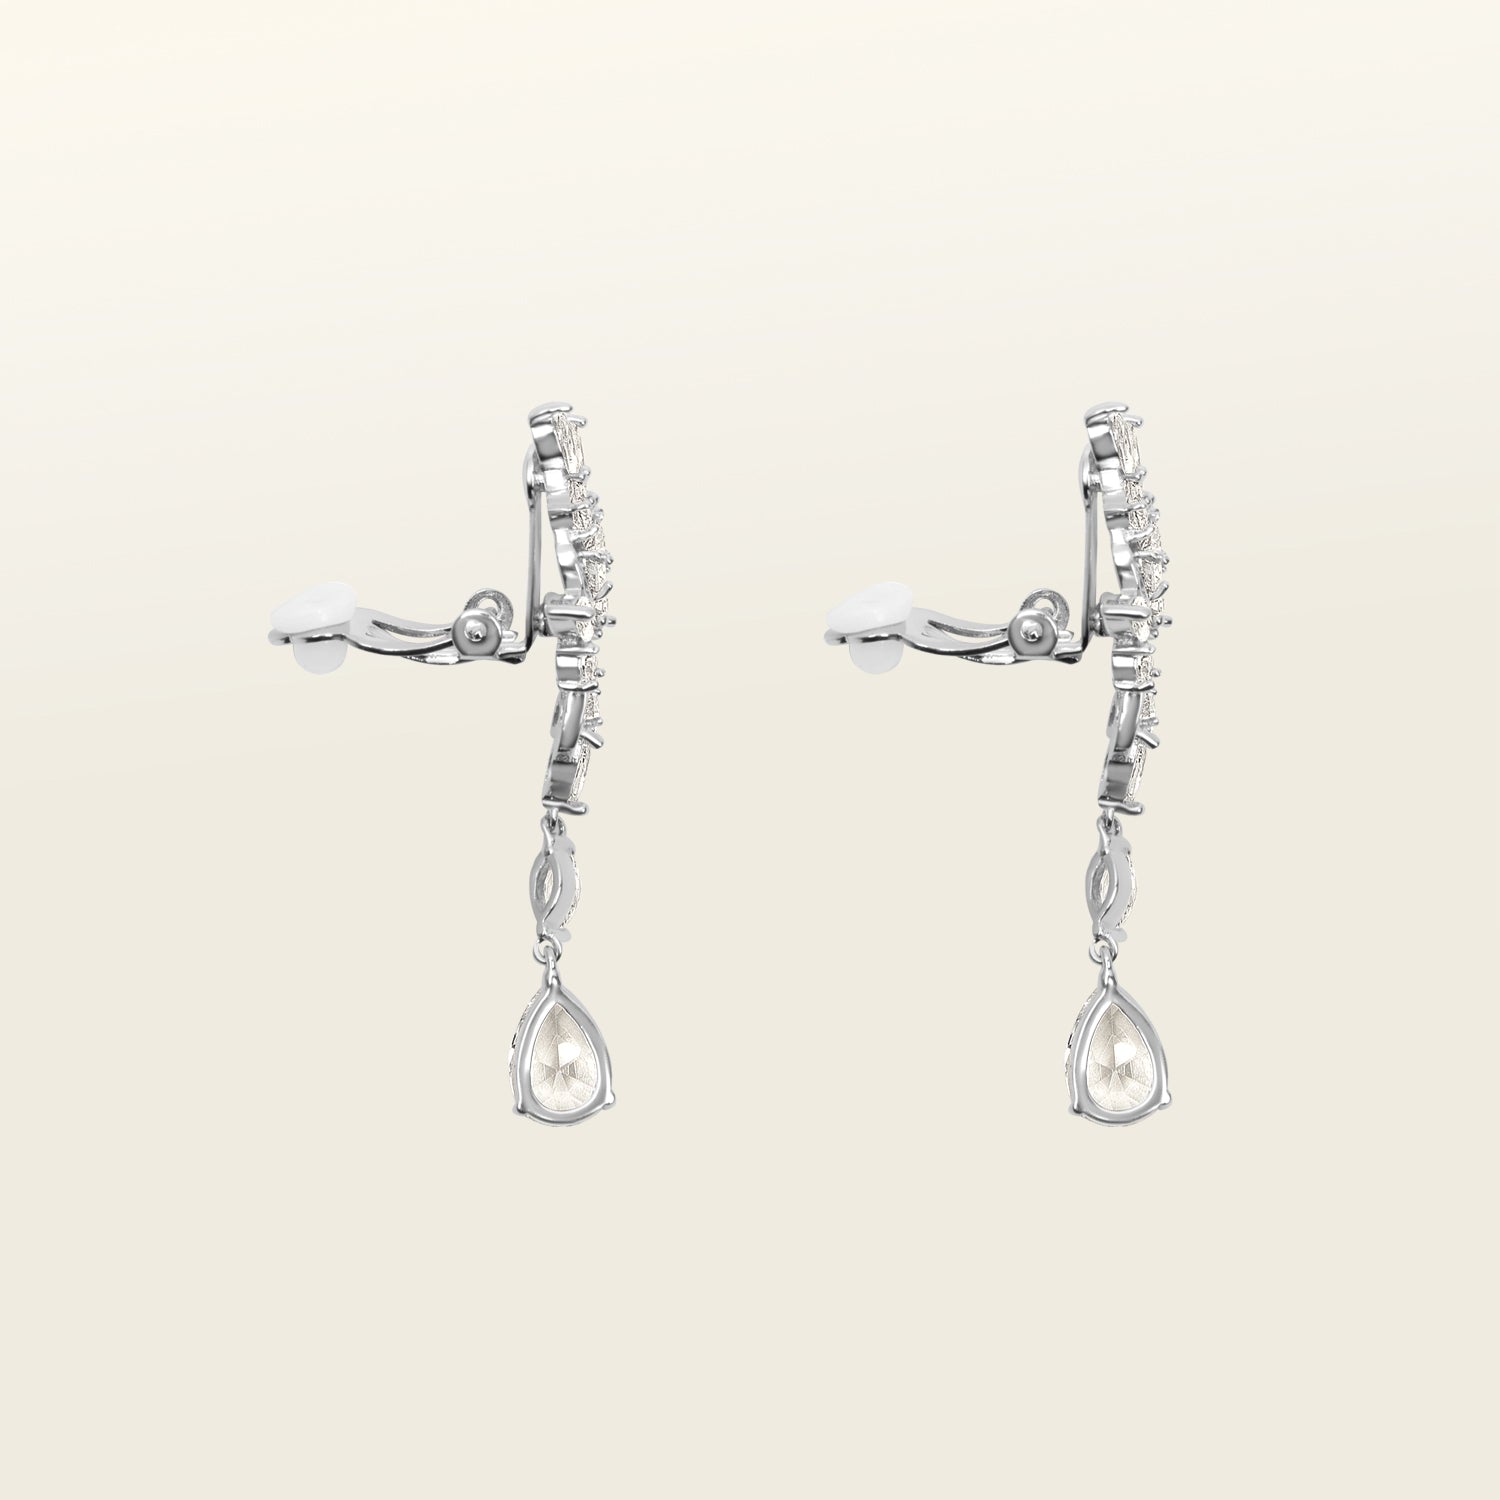 Image of the Evelyn Clip-On Earrings offer a secure fit for all ear types, ranging from thick/large ears to small/thin ears. With an average comfortable wear duration of 8-12 hours, these earrings have silver plated copper alloy components and feature a cubic zirconia setting. Additionally, the rubber padding is removable. Please note that this item is one pair.